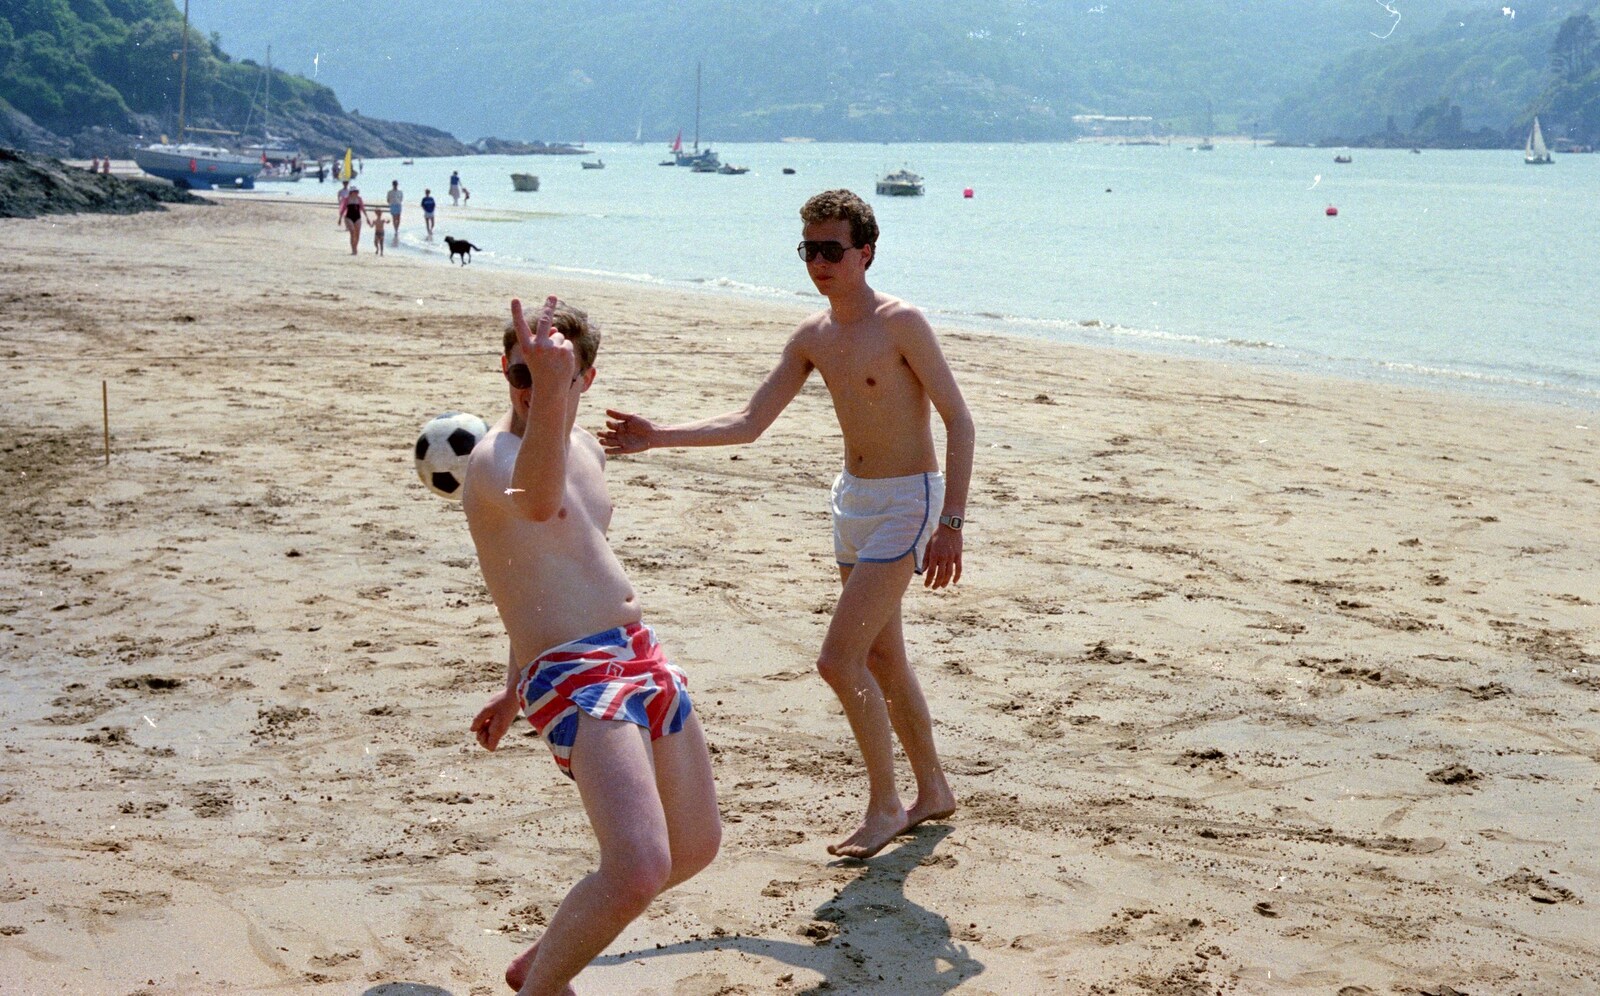 Mike's mate gives the Vs up from Uni: Twenty One Guns and Footie on the Beach, Plymouth Hoe and Salcombe, Devon - 15th June 1986